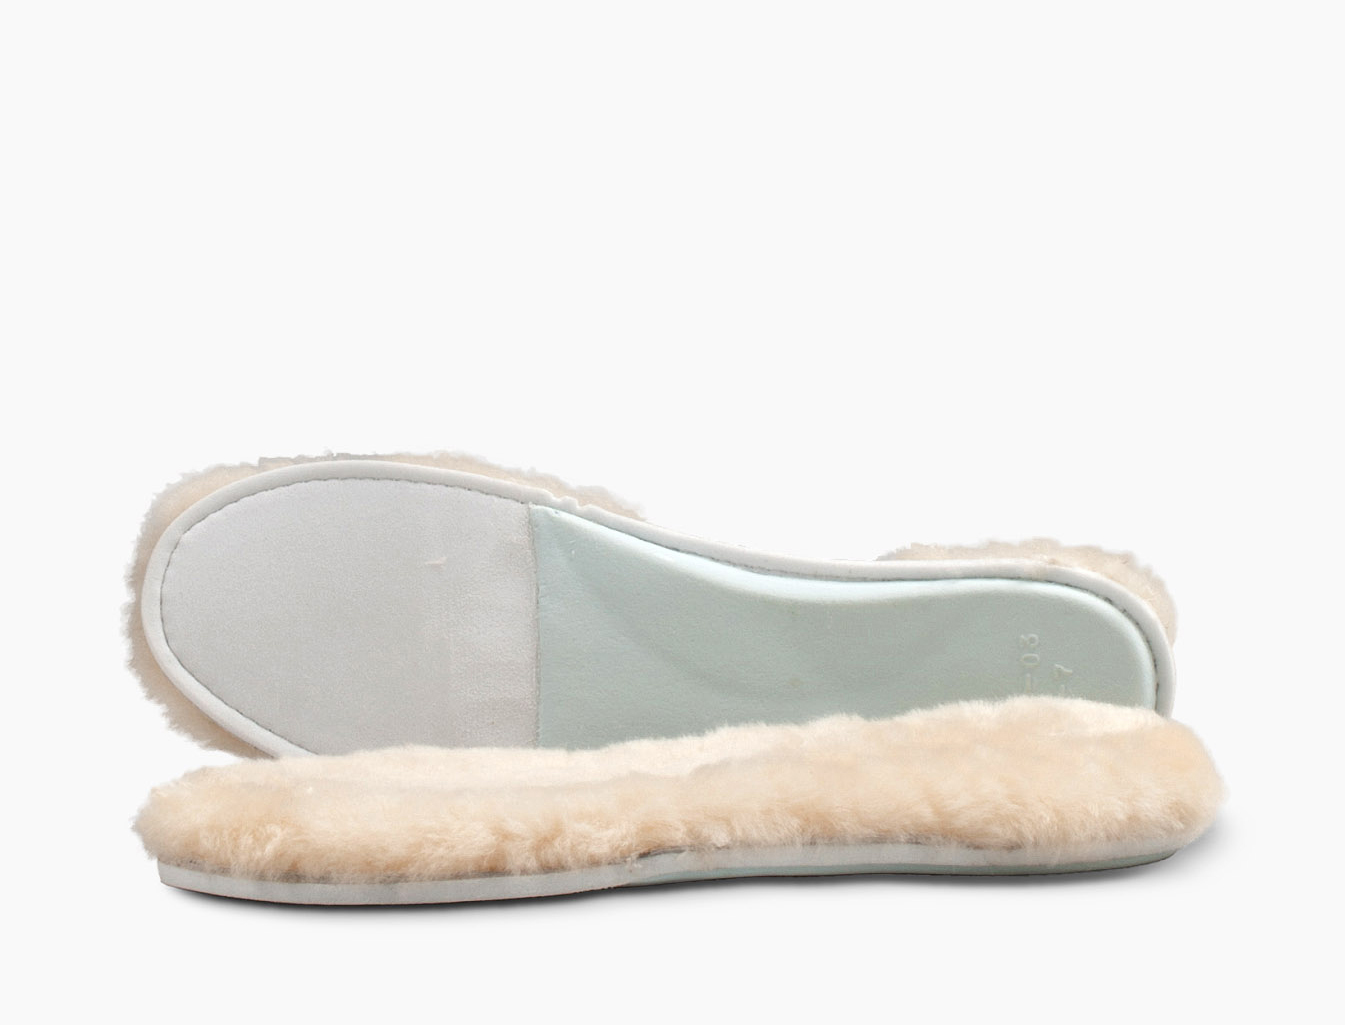 Ugg Slipper Insert Replacements new Zealand, SAVE 43% - online-pmo.com